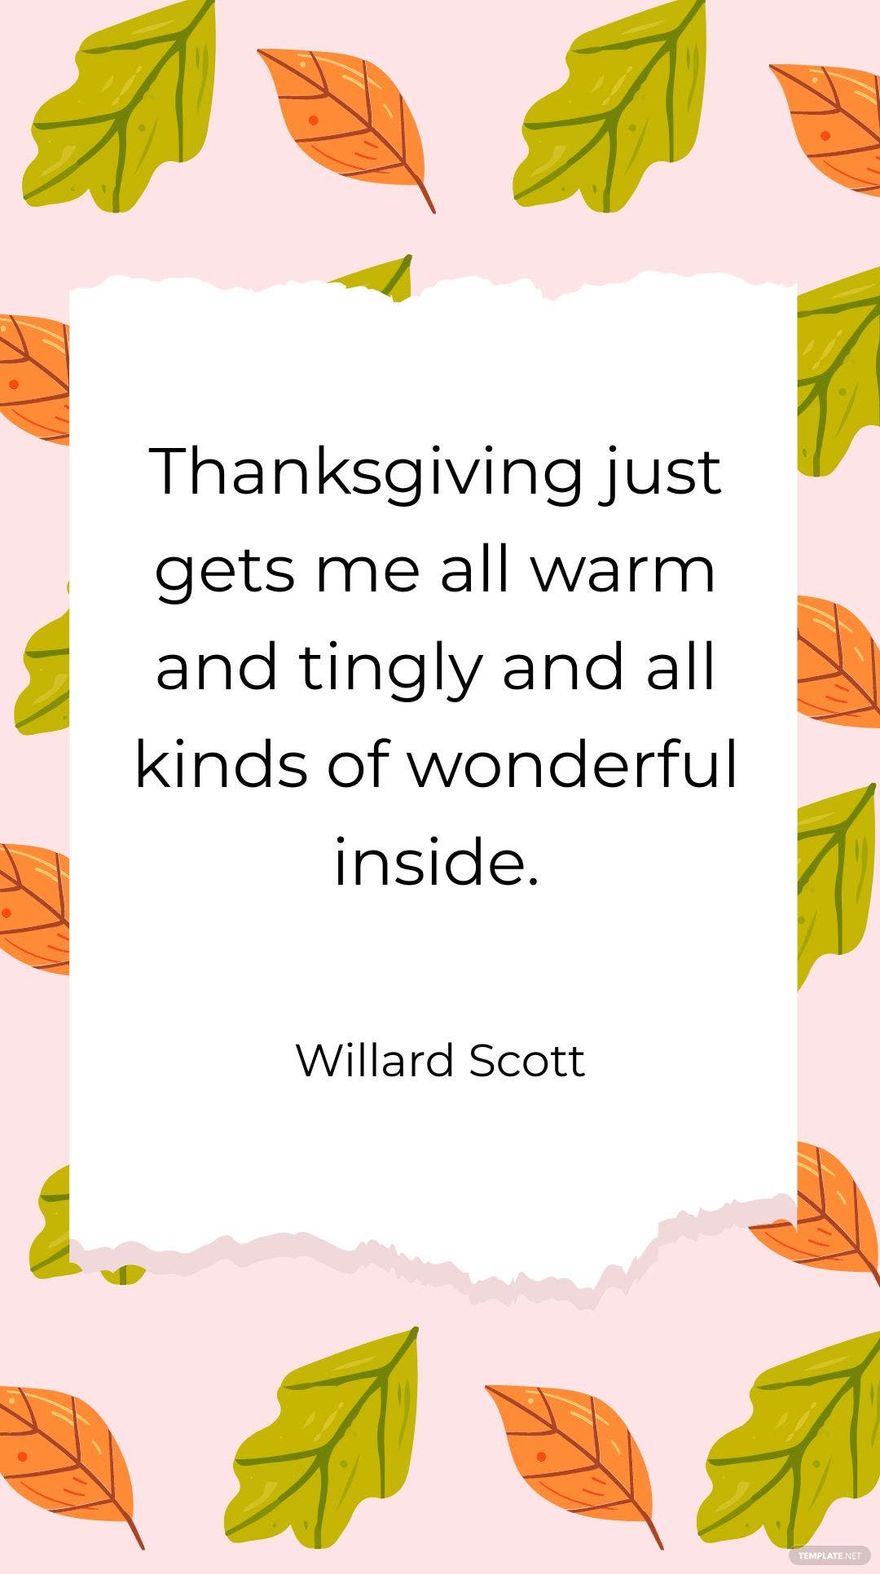 Free Willard Scott - Thanksgiving just gets me all warm and tingly and all kinds of wonderful inside.